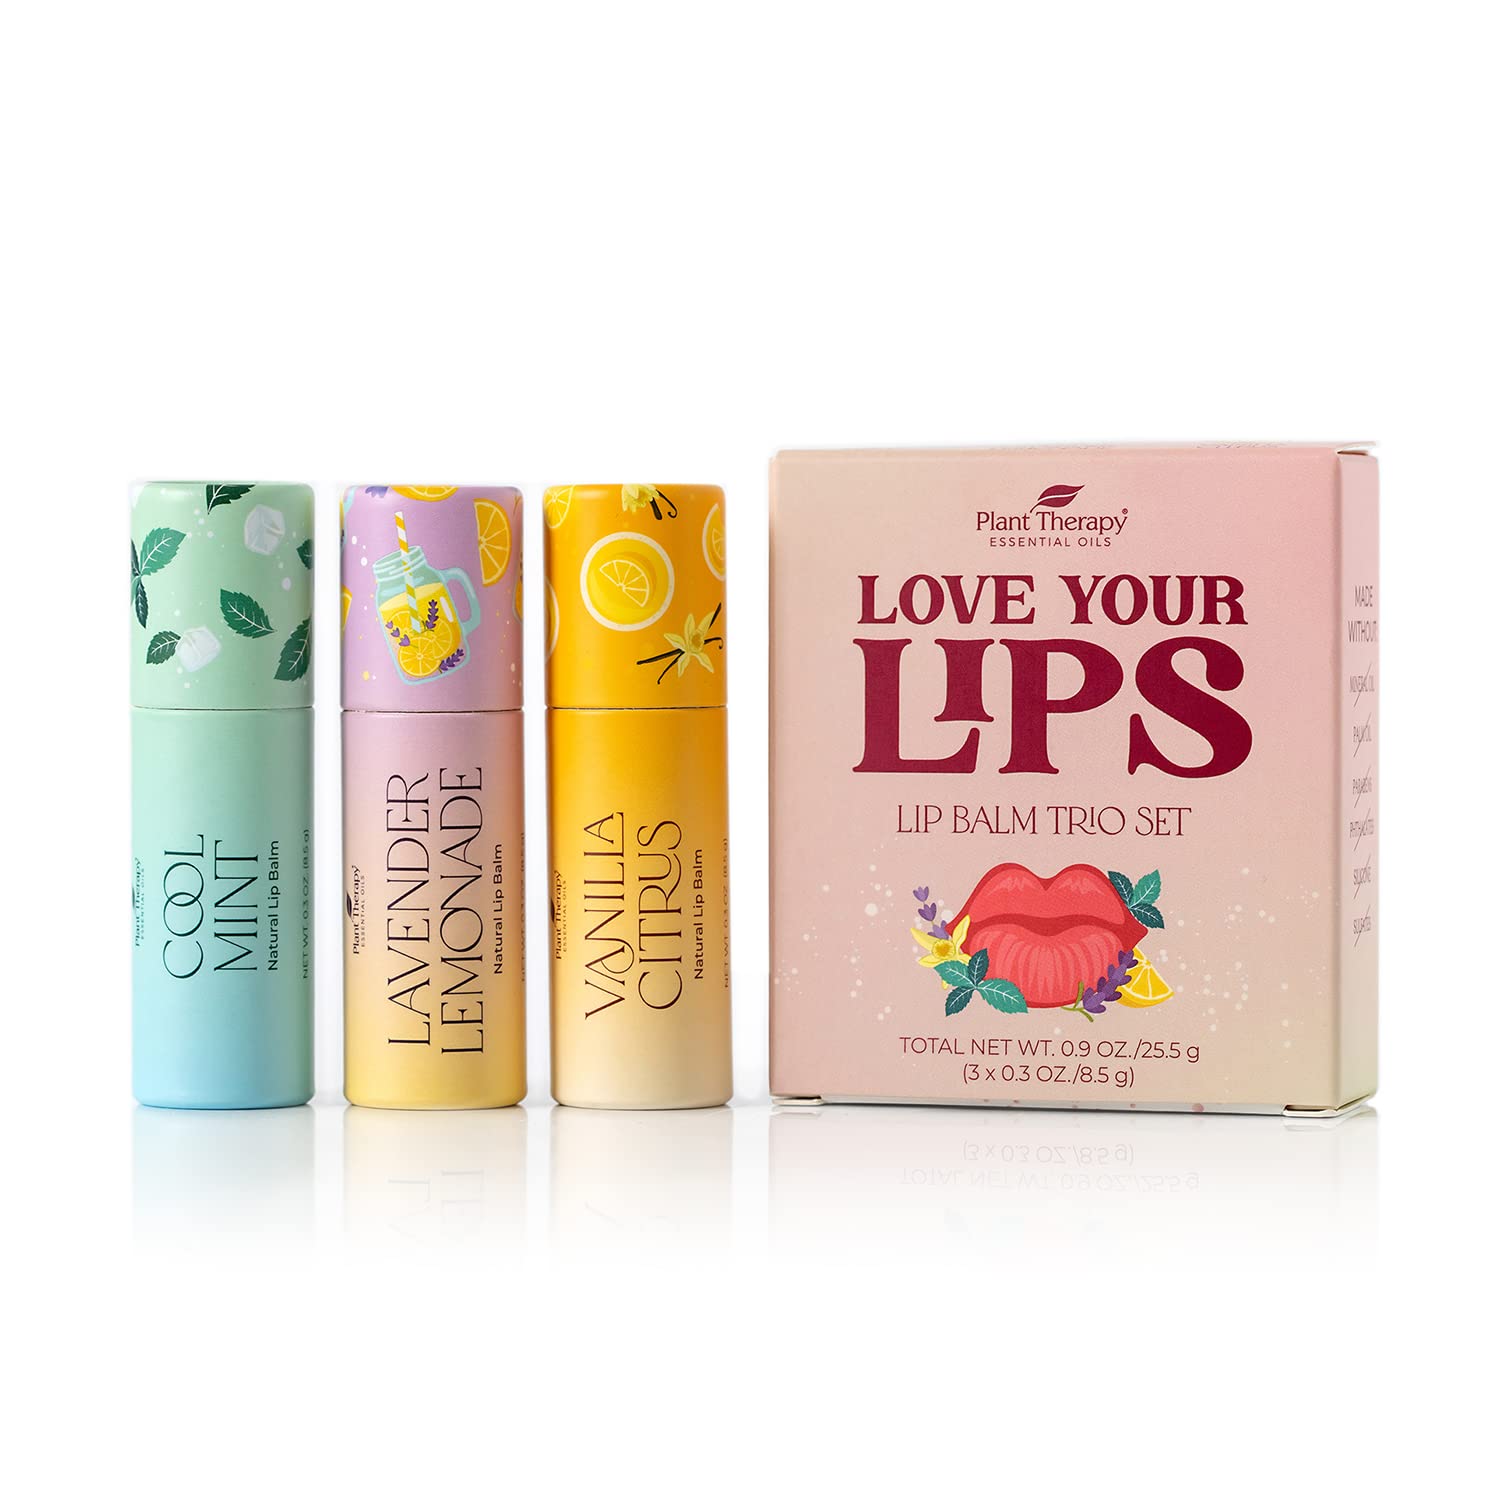 Plant Therapy Love Your Lips Lip Balm Trio Set 0.9 oz (25.5 g) Simple, Natural Ingredients & Packaged in Eco-Friendly Recyclable Cardboard, Refreshing Flavors Including: Lavender Lemonade, Vanilla Citrus, Cool Mint